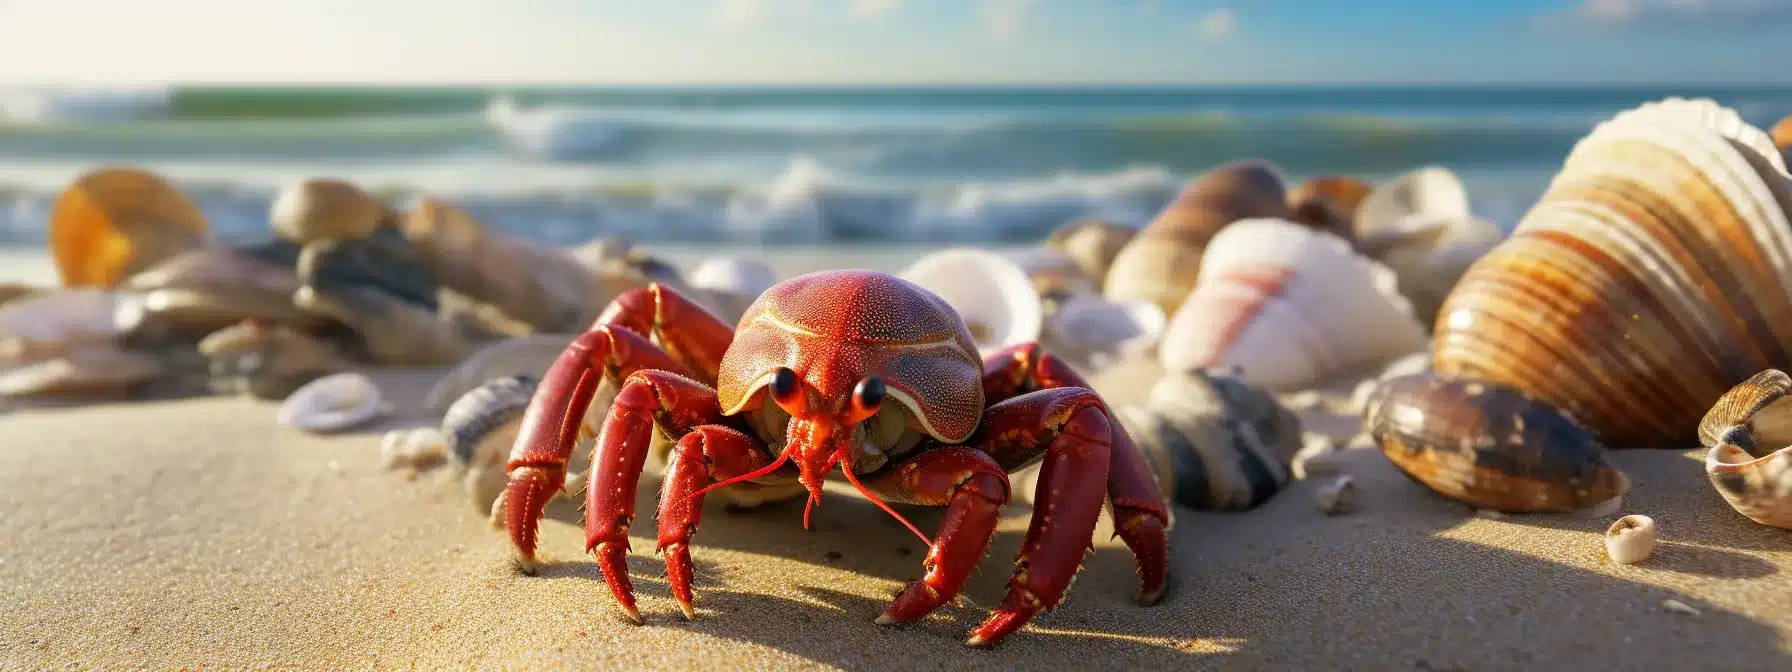 A Hermit Crab On A Beach With Various Shells To Choose From.